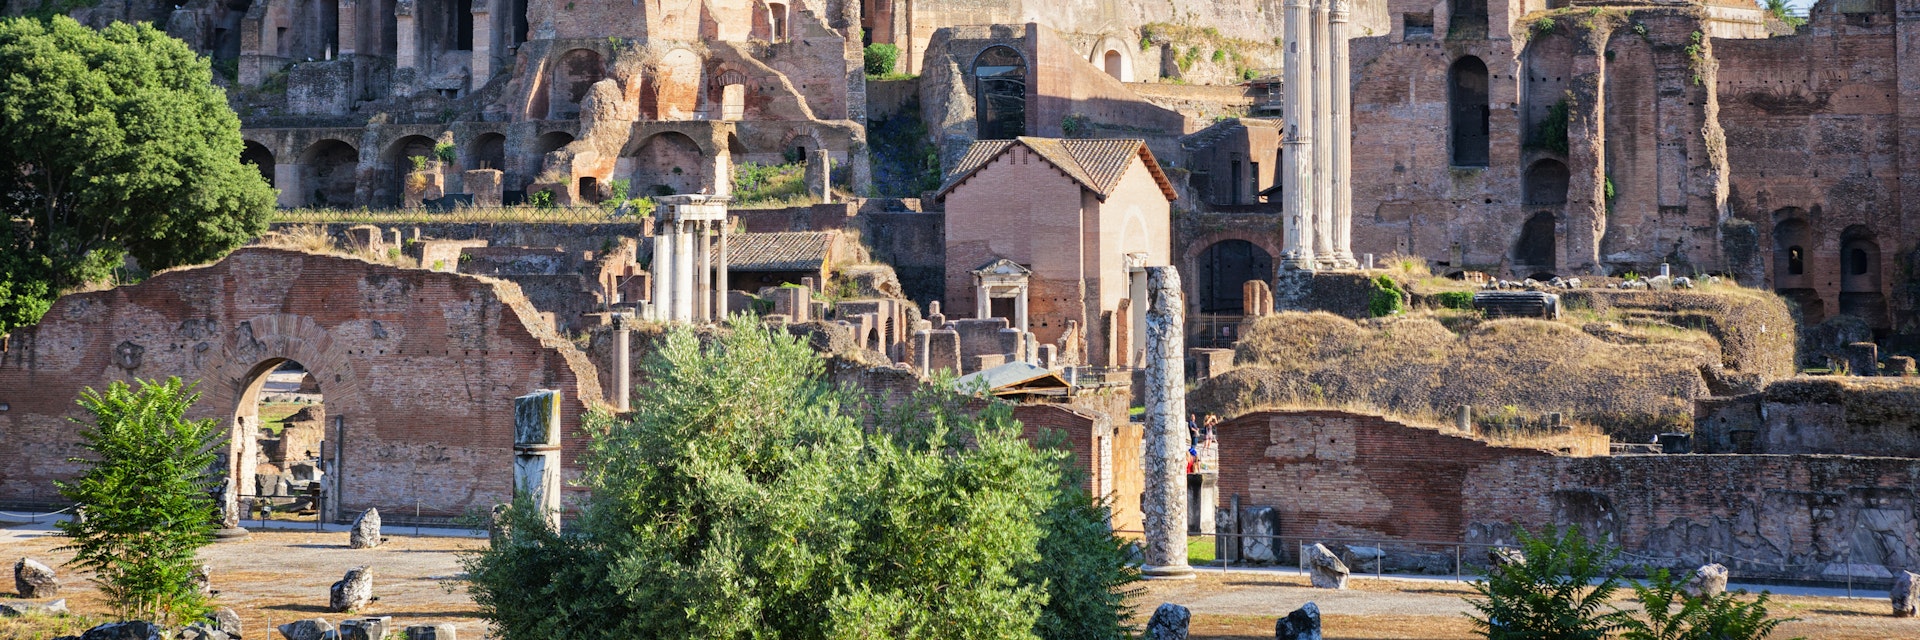 Farnese Gardens built a top Domus Tiberiana on Palatine Hill at the Roman forum in Rome, Italy.